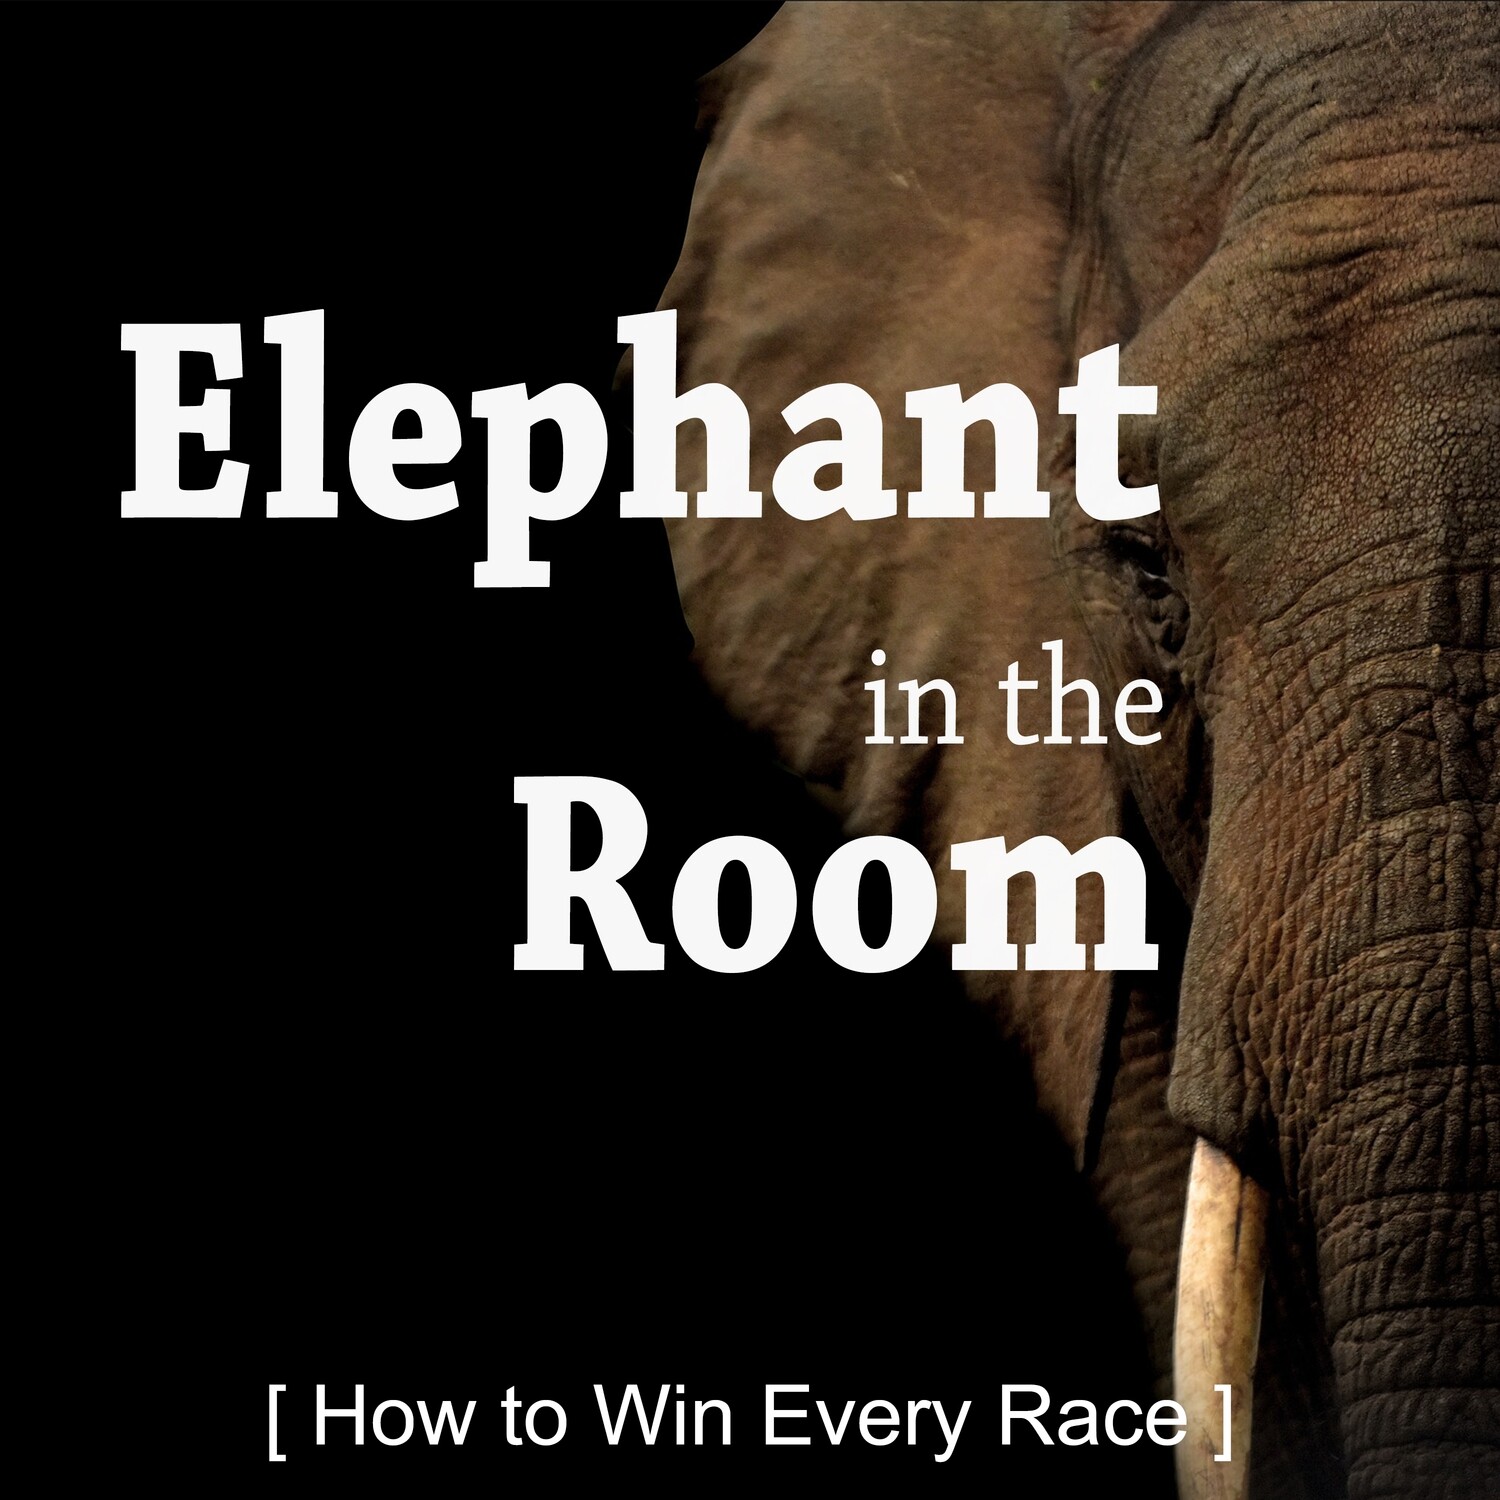 How to Win Every Race